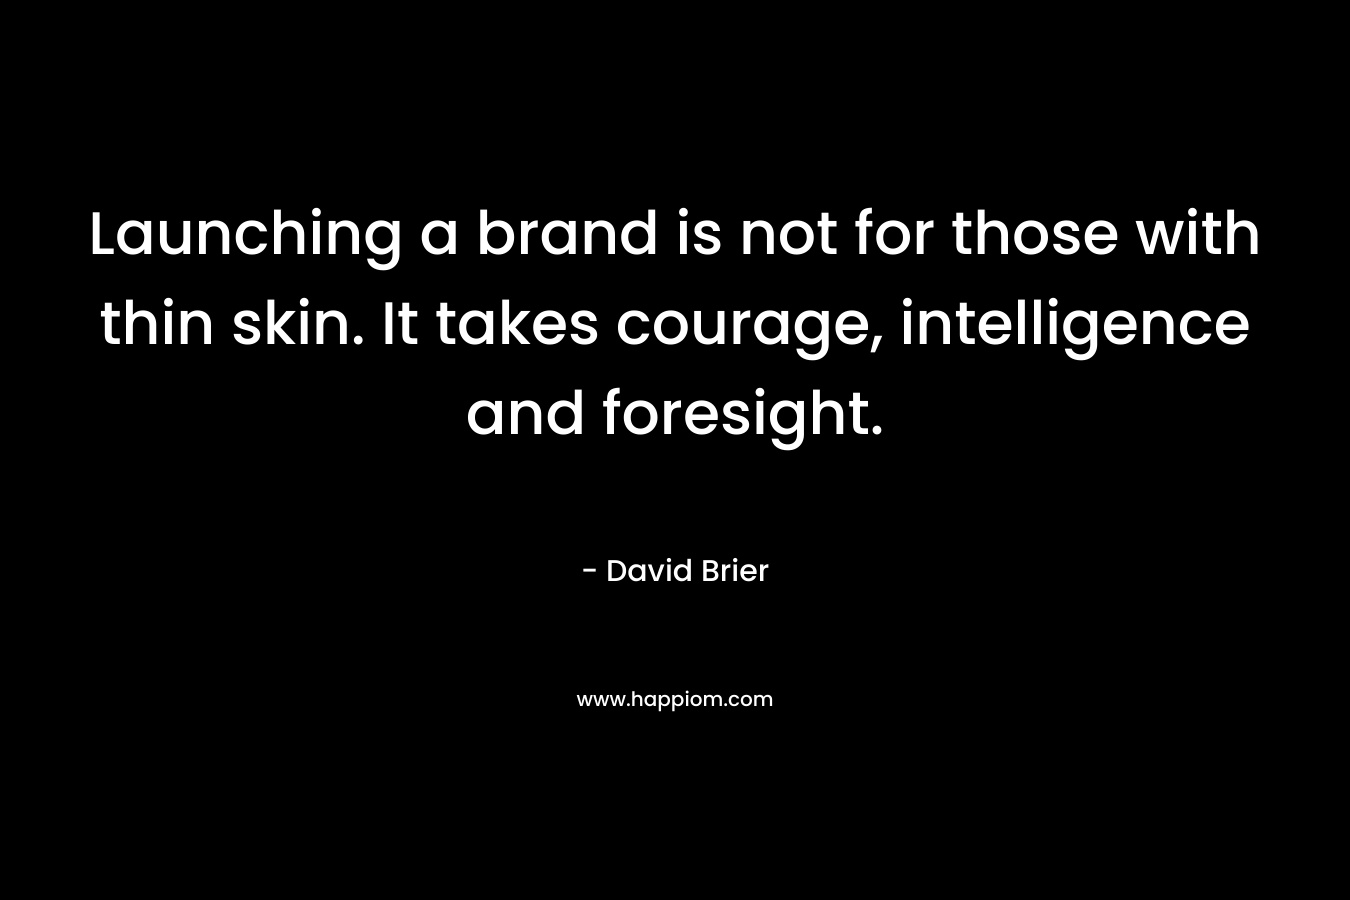 Launching a brand is not for those with thin skin. It takes courage, intelligence and foresight. – David Brier